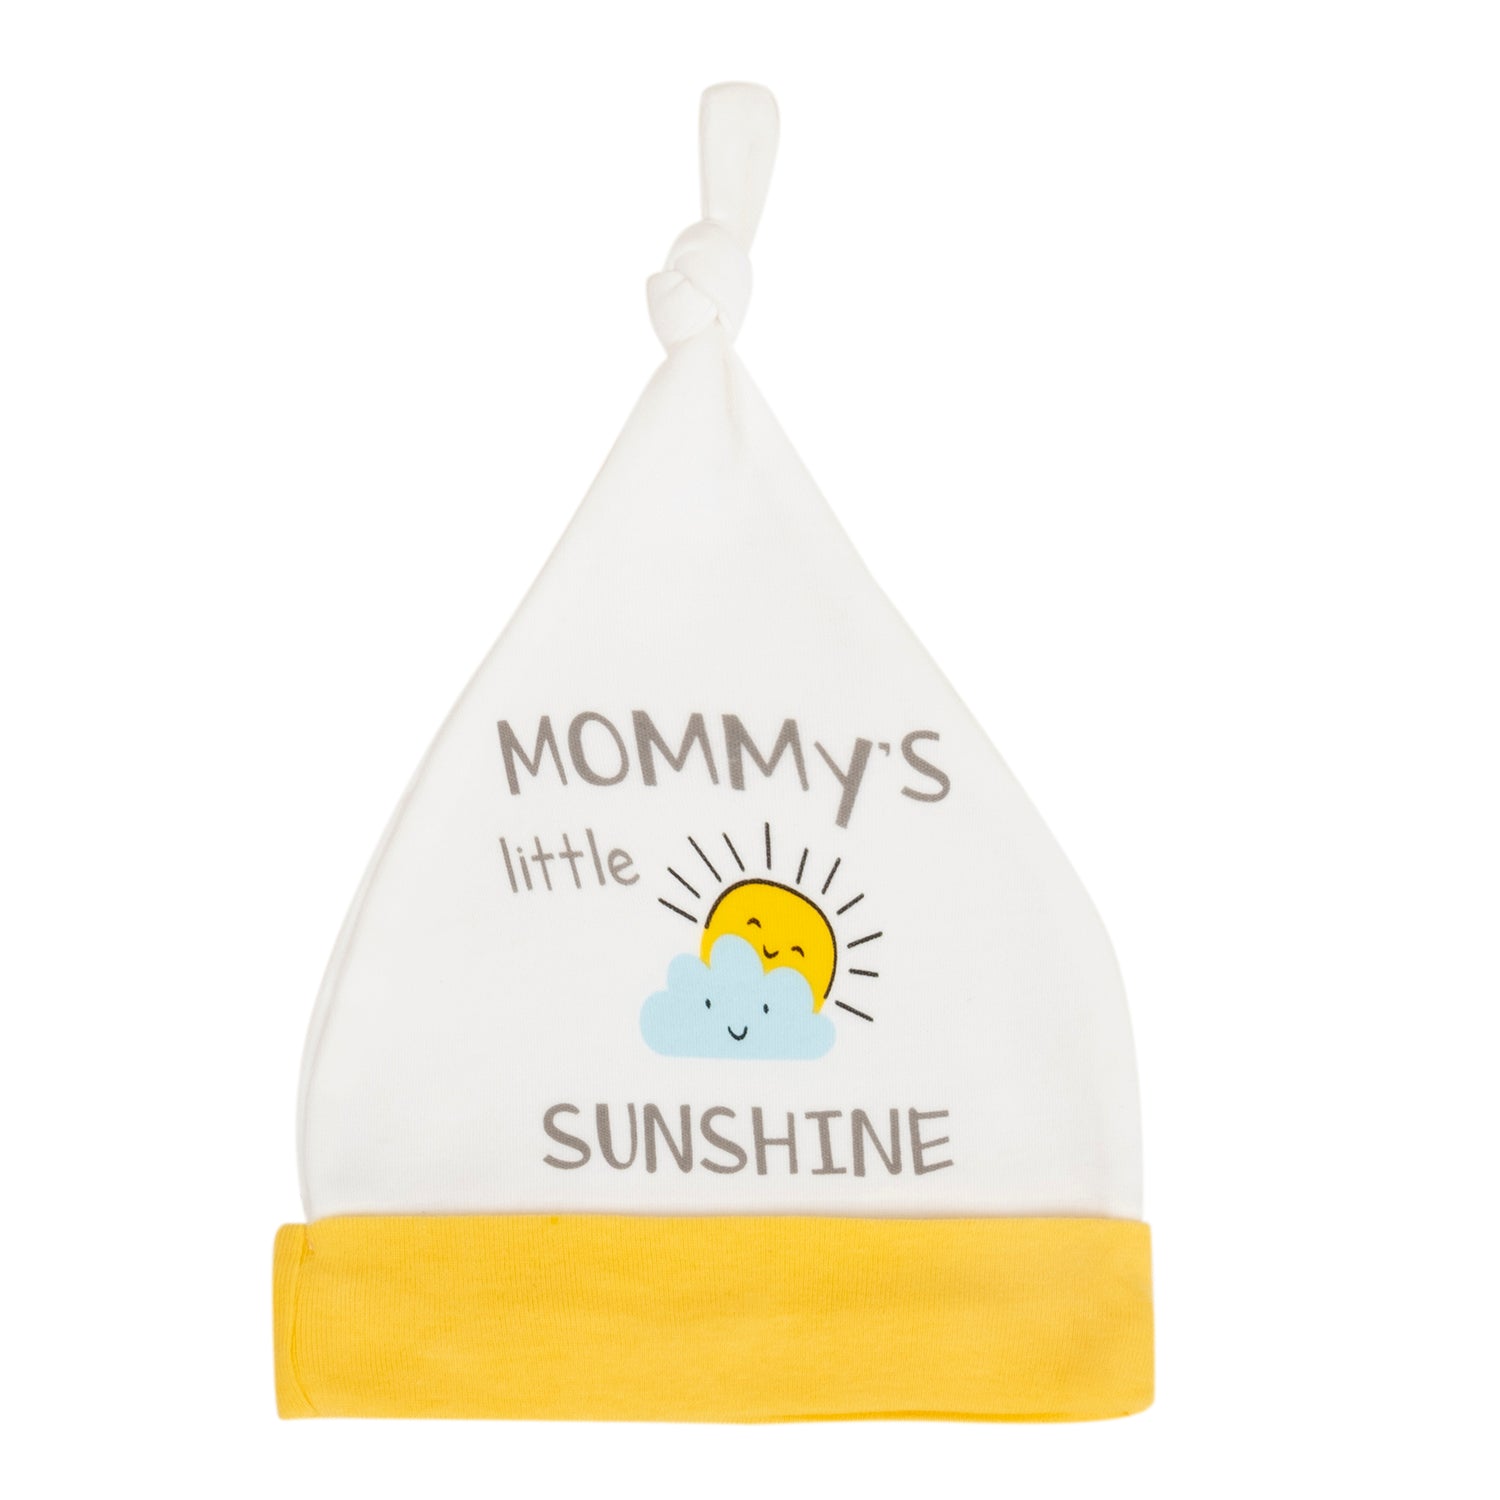 Baby Moo Mommy's Little Sunshine Knotted Infants Ultra Soft 100% Cotton All Season Pack of 3 Caps - Yellow